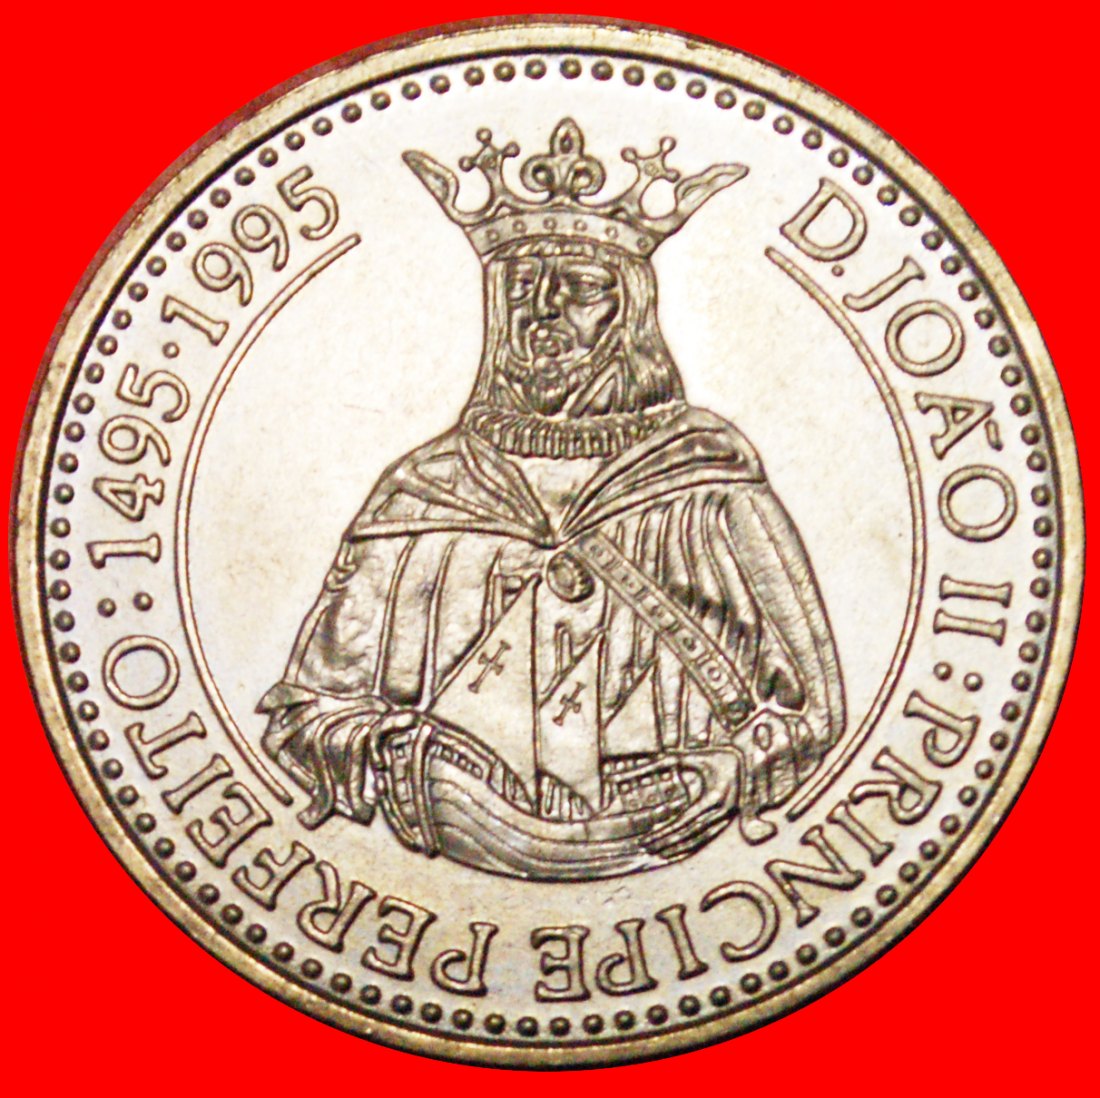  √ SHIP: PORTUGAL ★ 200 ESCUDOS 1495-1995 UNC MINT LUSTER! LOW START ★ NO RESERVE!   